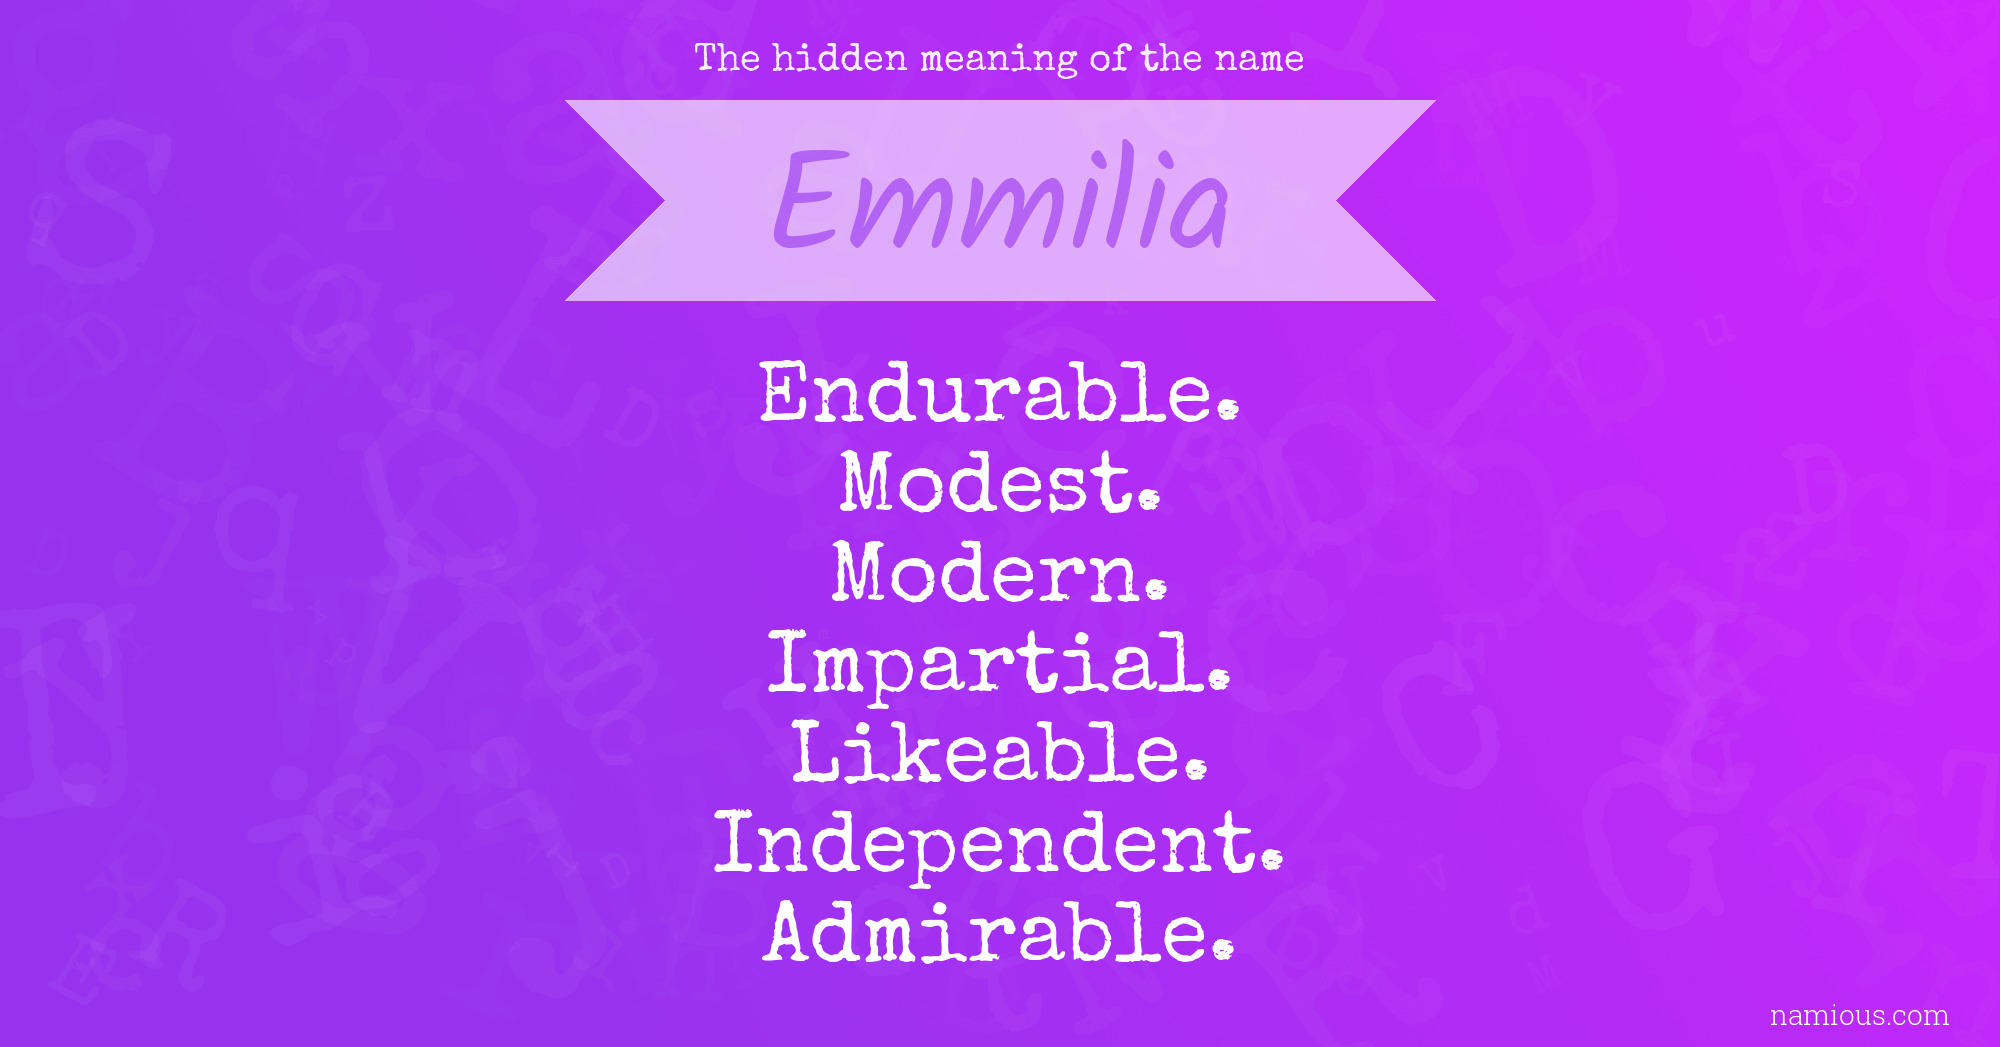 The hidden meaning of the name Emmilia